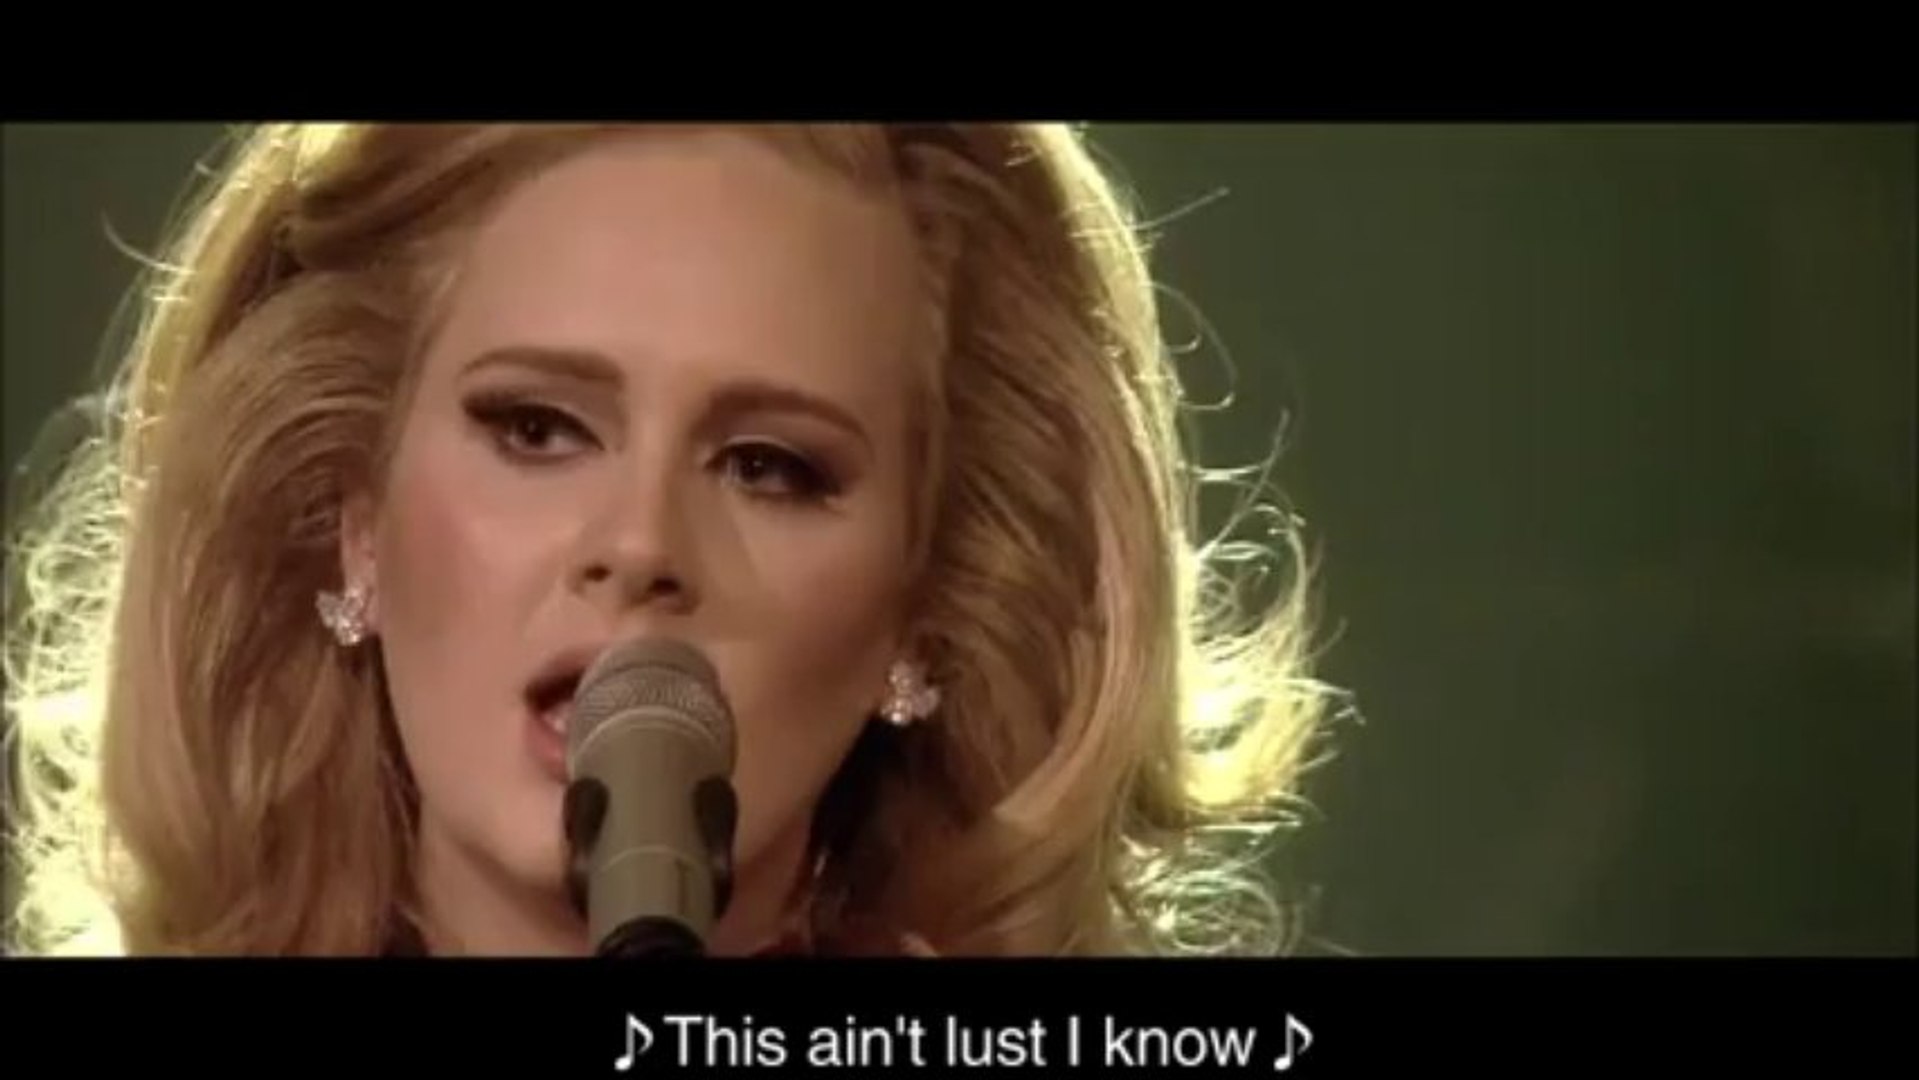 Adele live at the royal albert hall video free download 